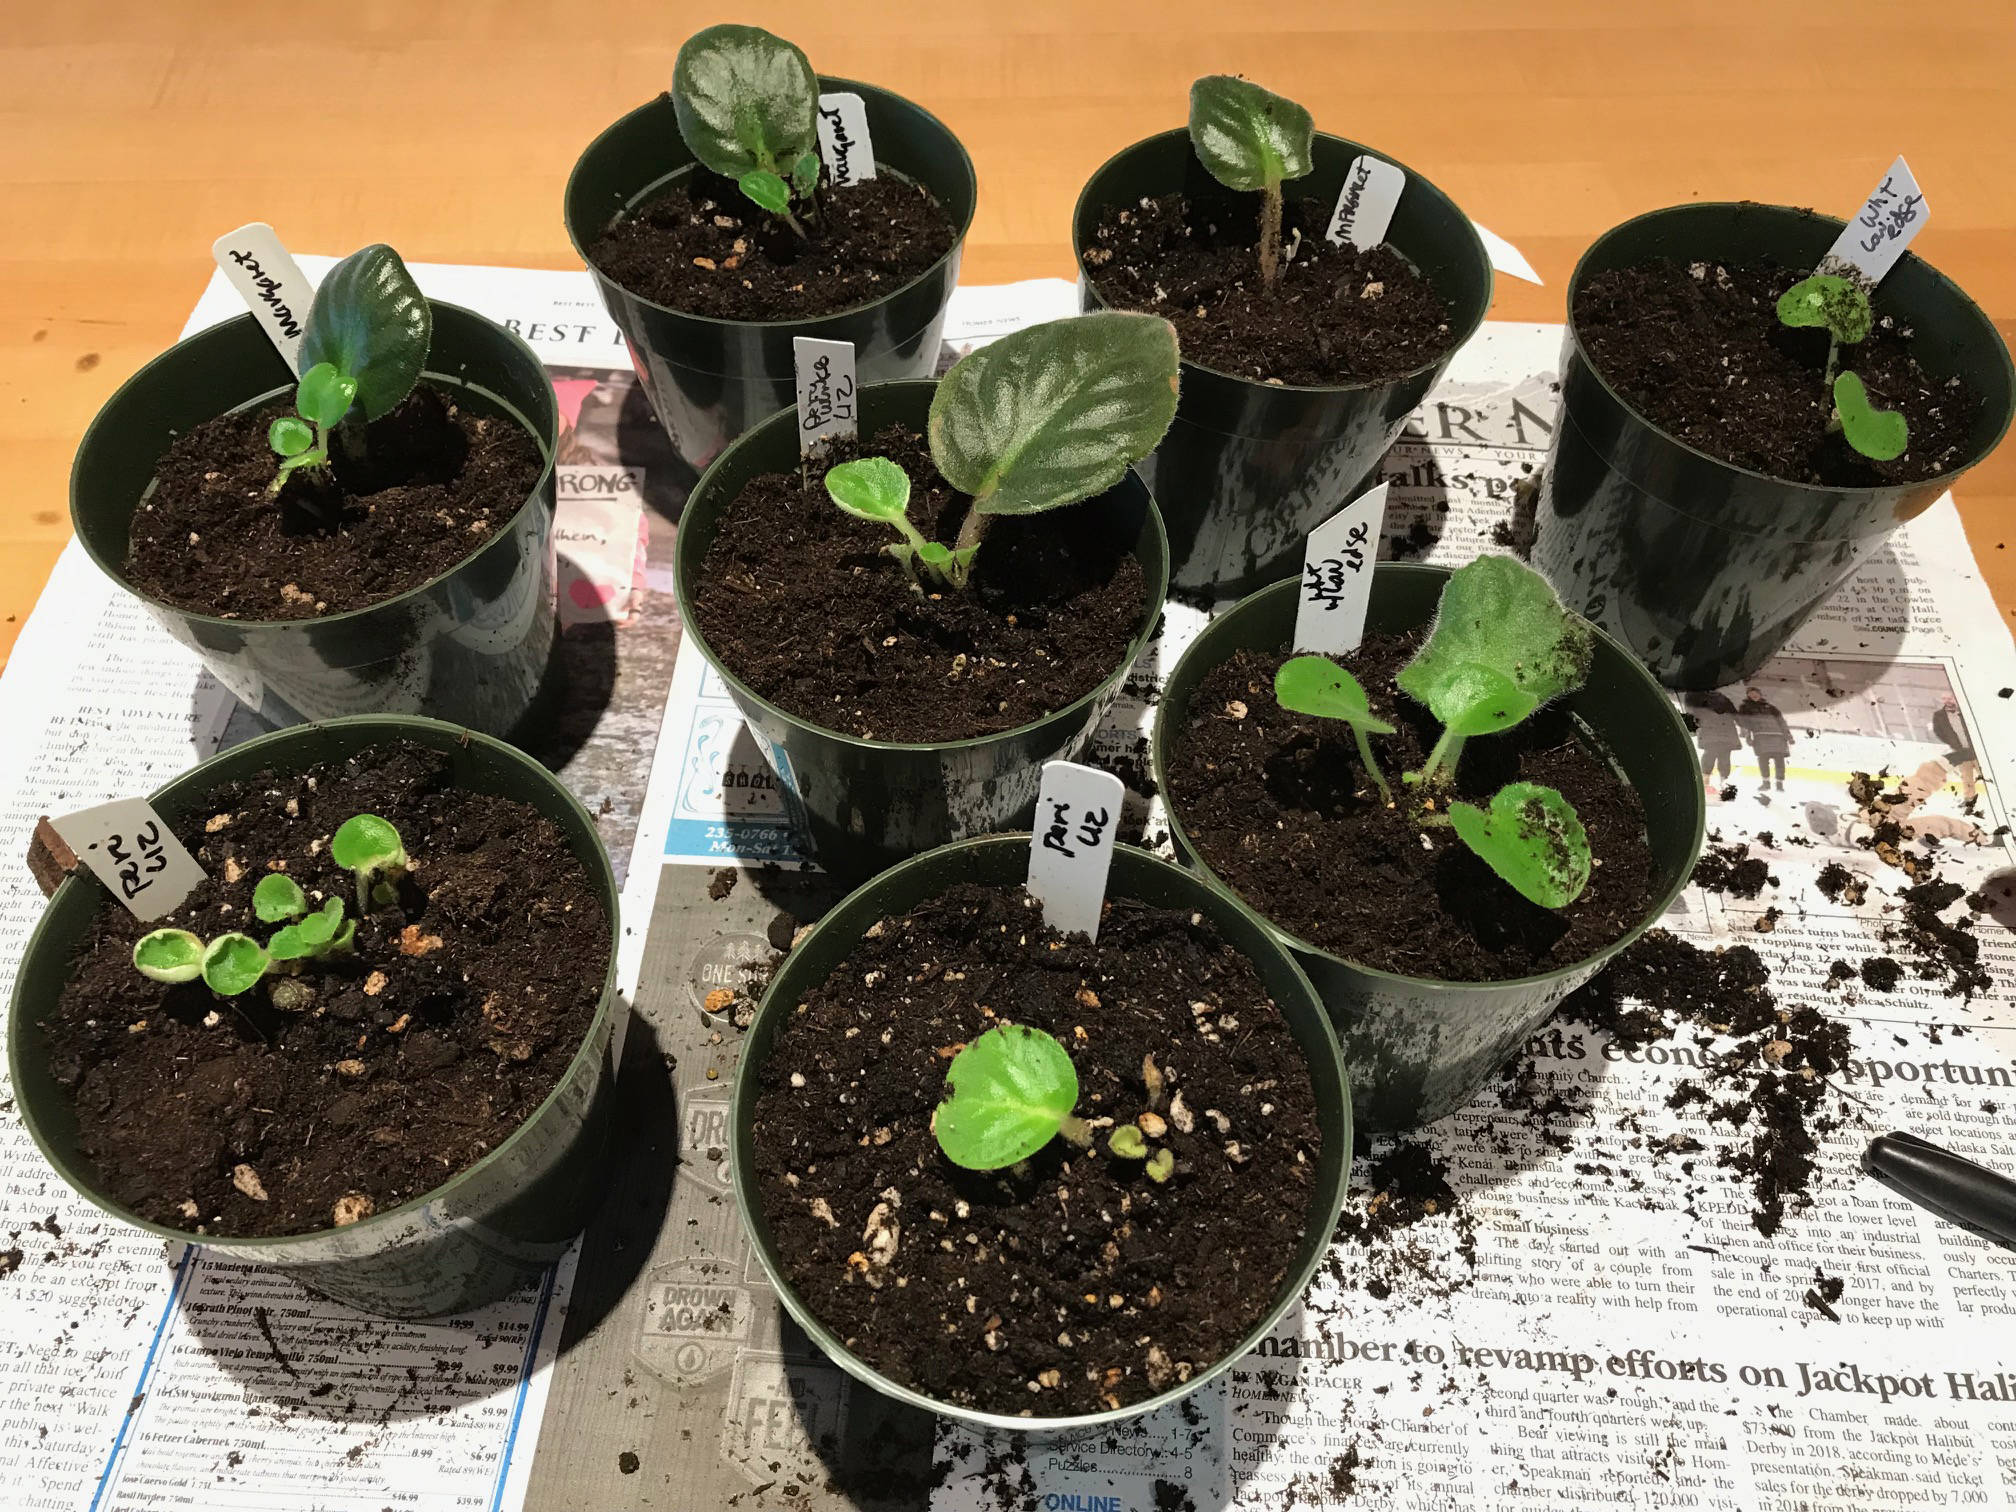 African violet seedlings have been started from leaf cuttings, as seen at Rosemary Fitzpatrick’s home in Homer, Alaska, on Jan. 27, 2019. (Photo by Rosemary Fitzpatrick)